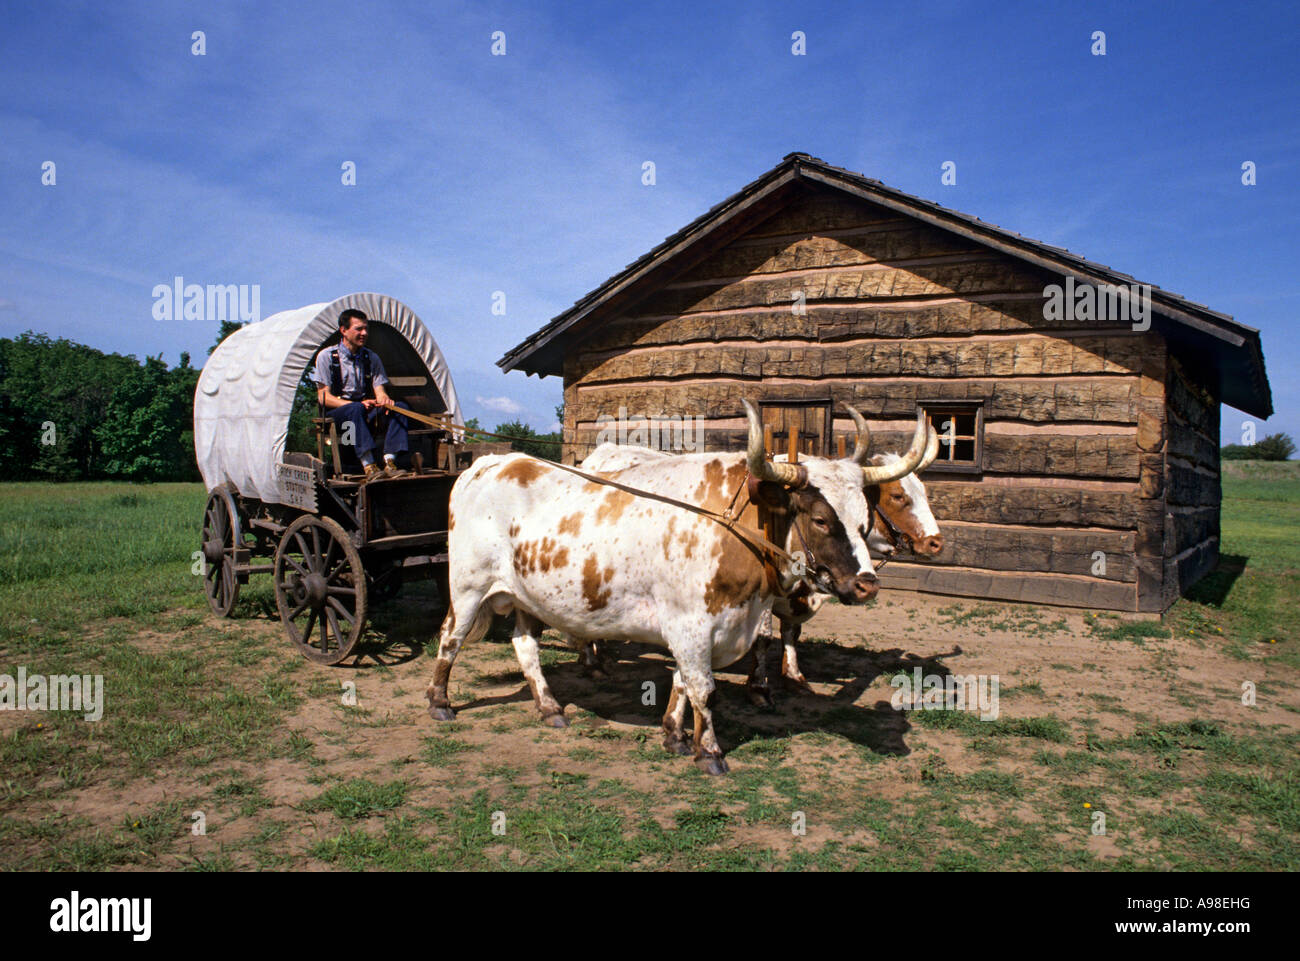 OXEN AND COVERED WAGON AT ROCK CREEK STATION STATE HISTORICAL PARK ALONG THE OREGON TRAIL, S.E. NEBRASKA.  SUMMER Stock Photo